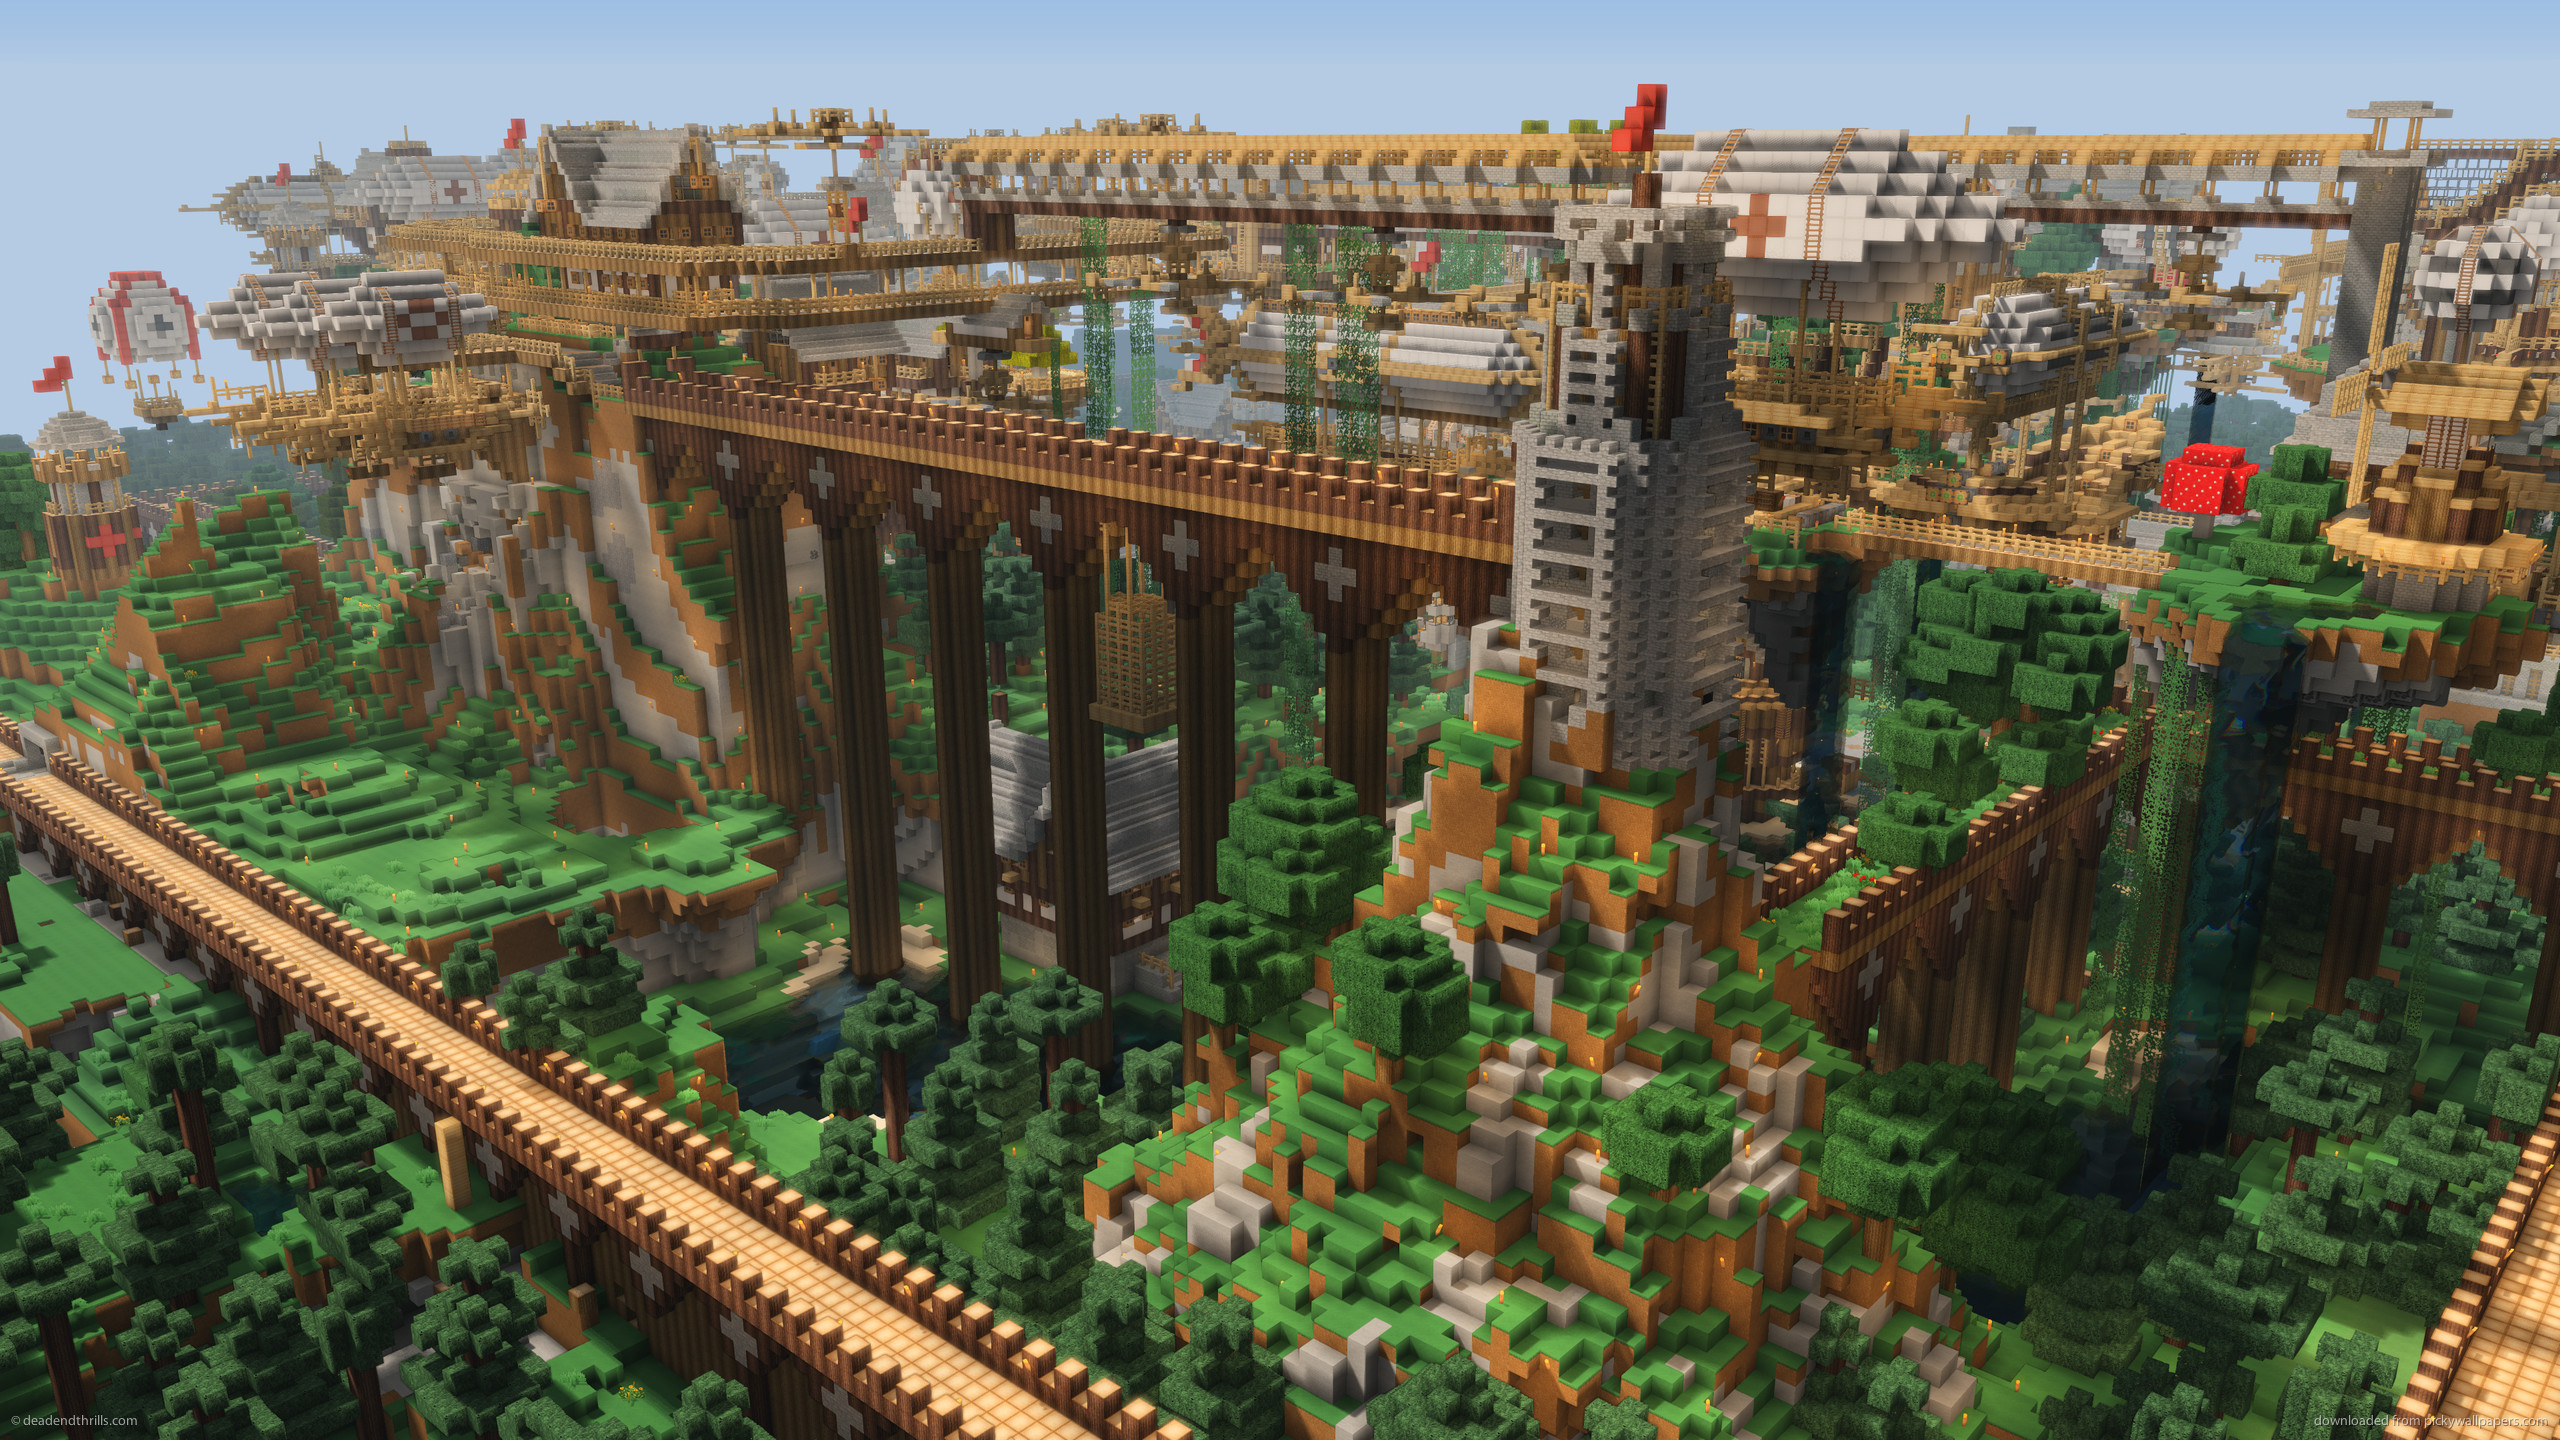 2560x1440 Page : Full HD p Minecraft Wallpapers HD, Desktop Backgrounds 1920 .